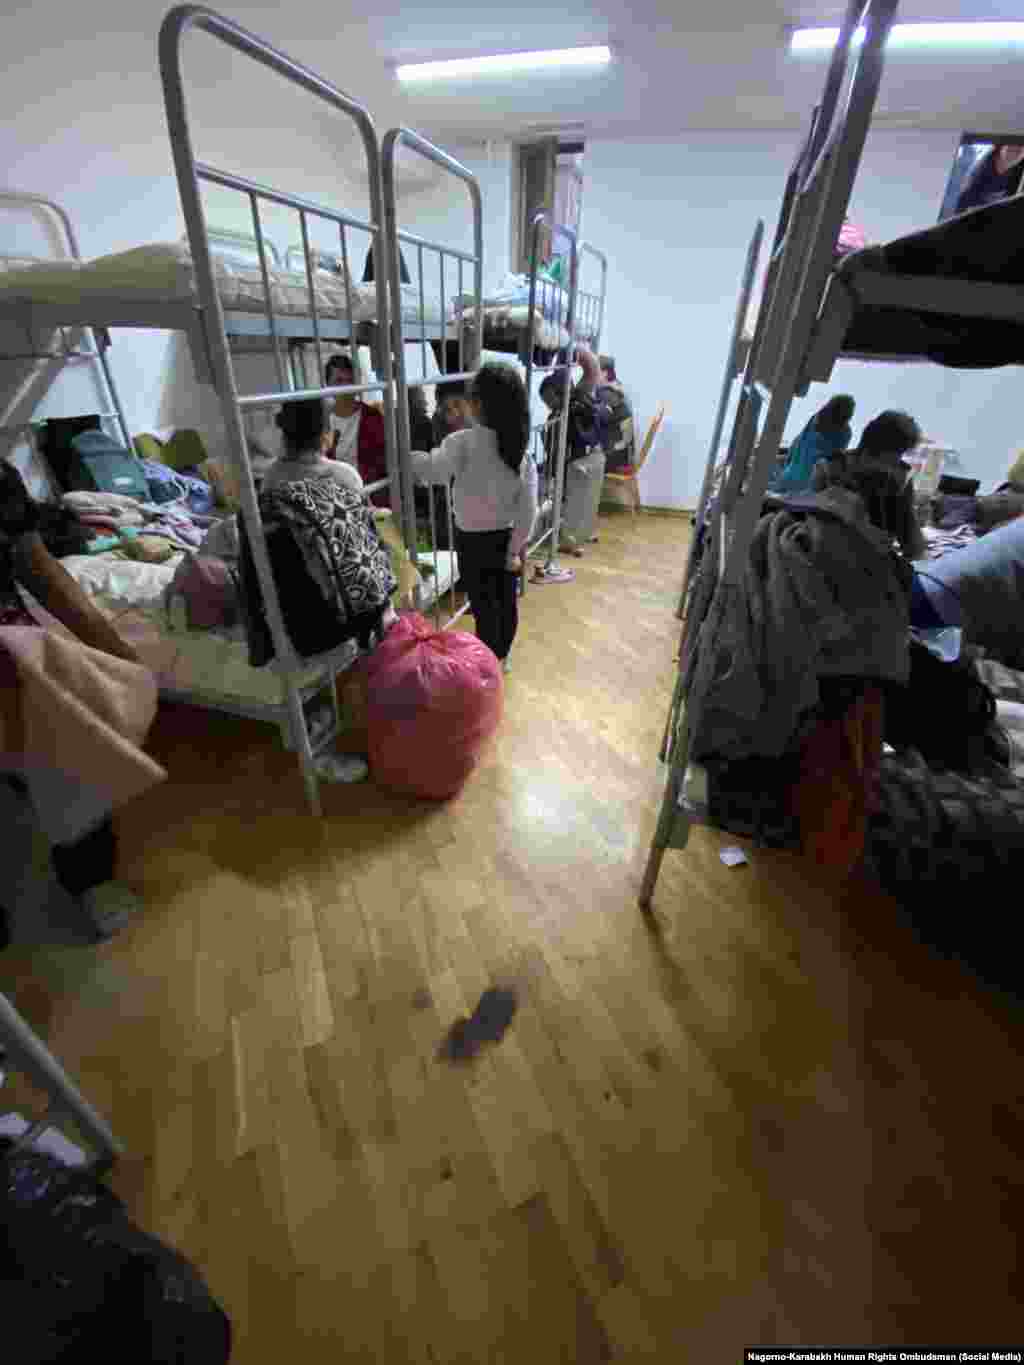 A social media photo dated September 21 from the Nagorno-Karabakh human rights ombudsman&nbsp;reportedly shows Armenian evacuees living in challenging conditions. &quot;More than 10,000 evacuated people are currently staying in basements without proper food, water, electricity, and all other basic conditions of living. Azerbaijan is committing a genocide in Artsakh (Nagorno-Karabakh)&nbsp;in real time with the tacit consent of the international community,&quot; the ombudsman wrote on X, formerly known as Twitter.